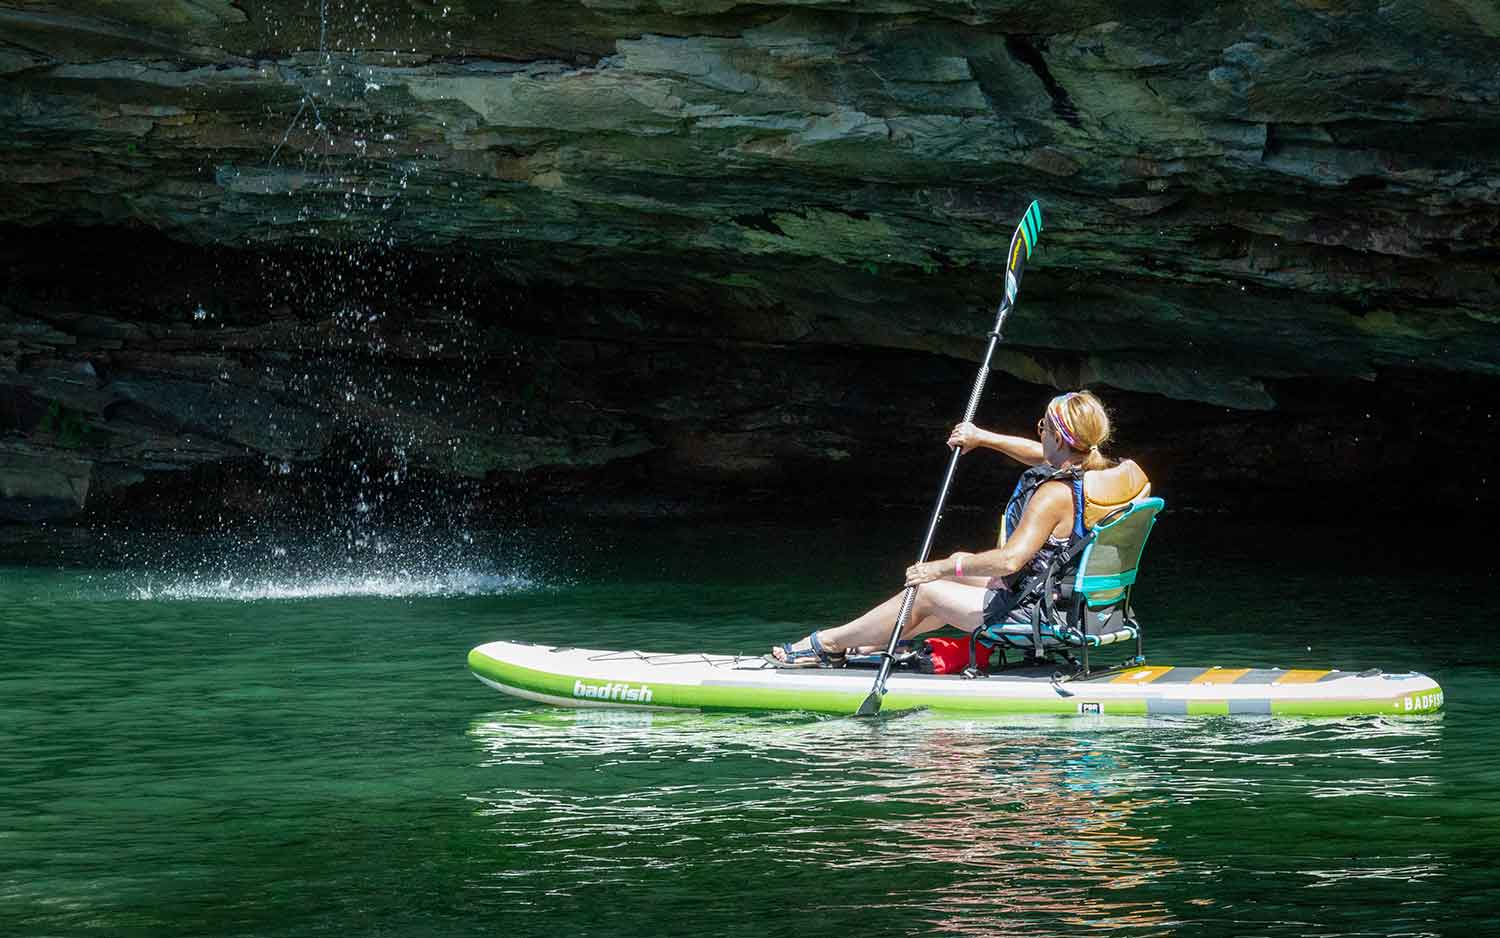 A guest enjoys kayak touring on summersville lake in west virginia beneath a waterfall with ace adenture resort.